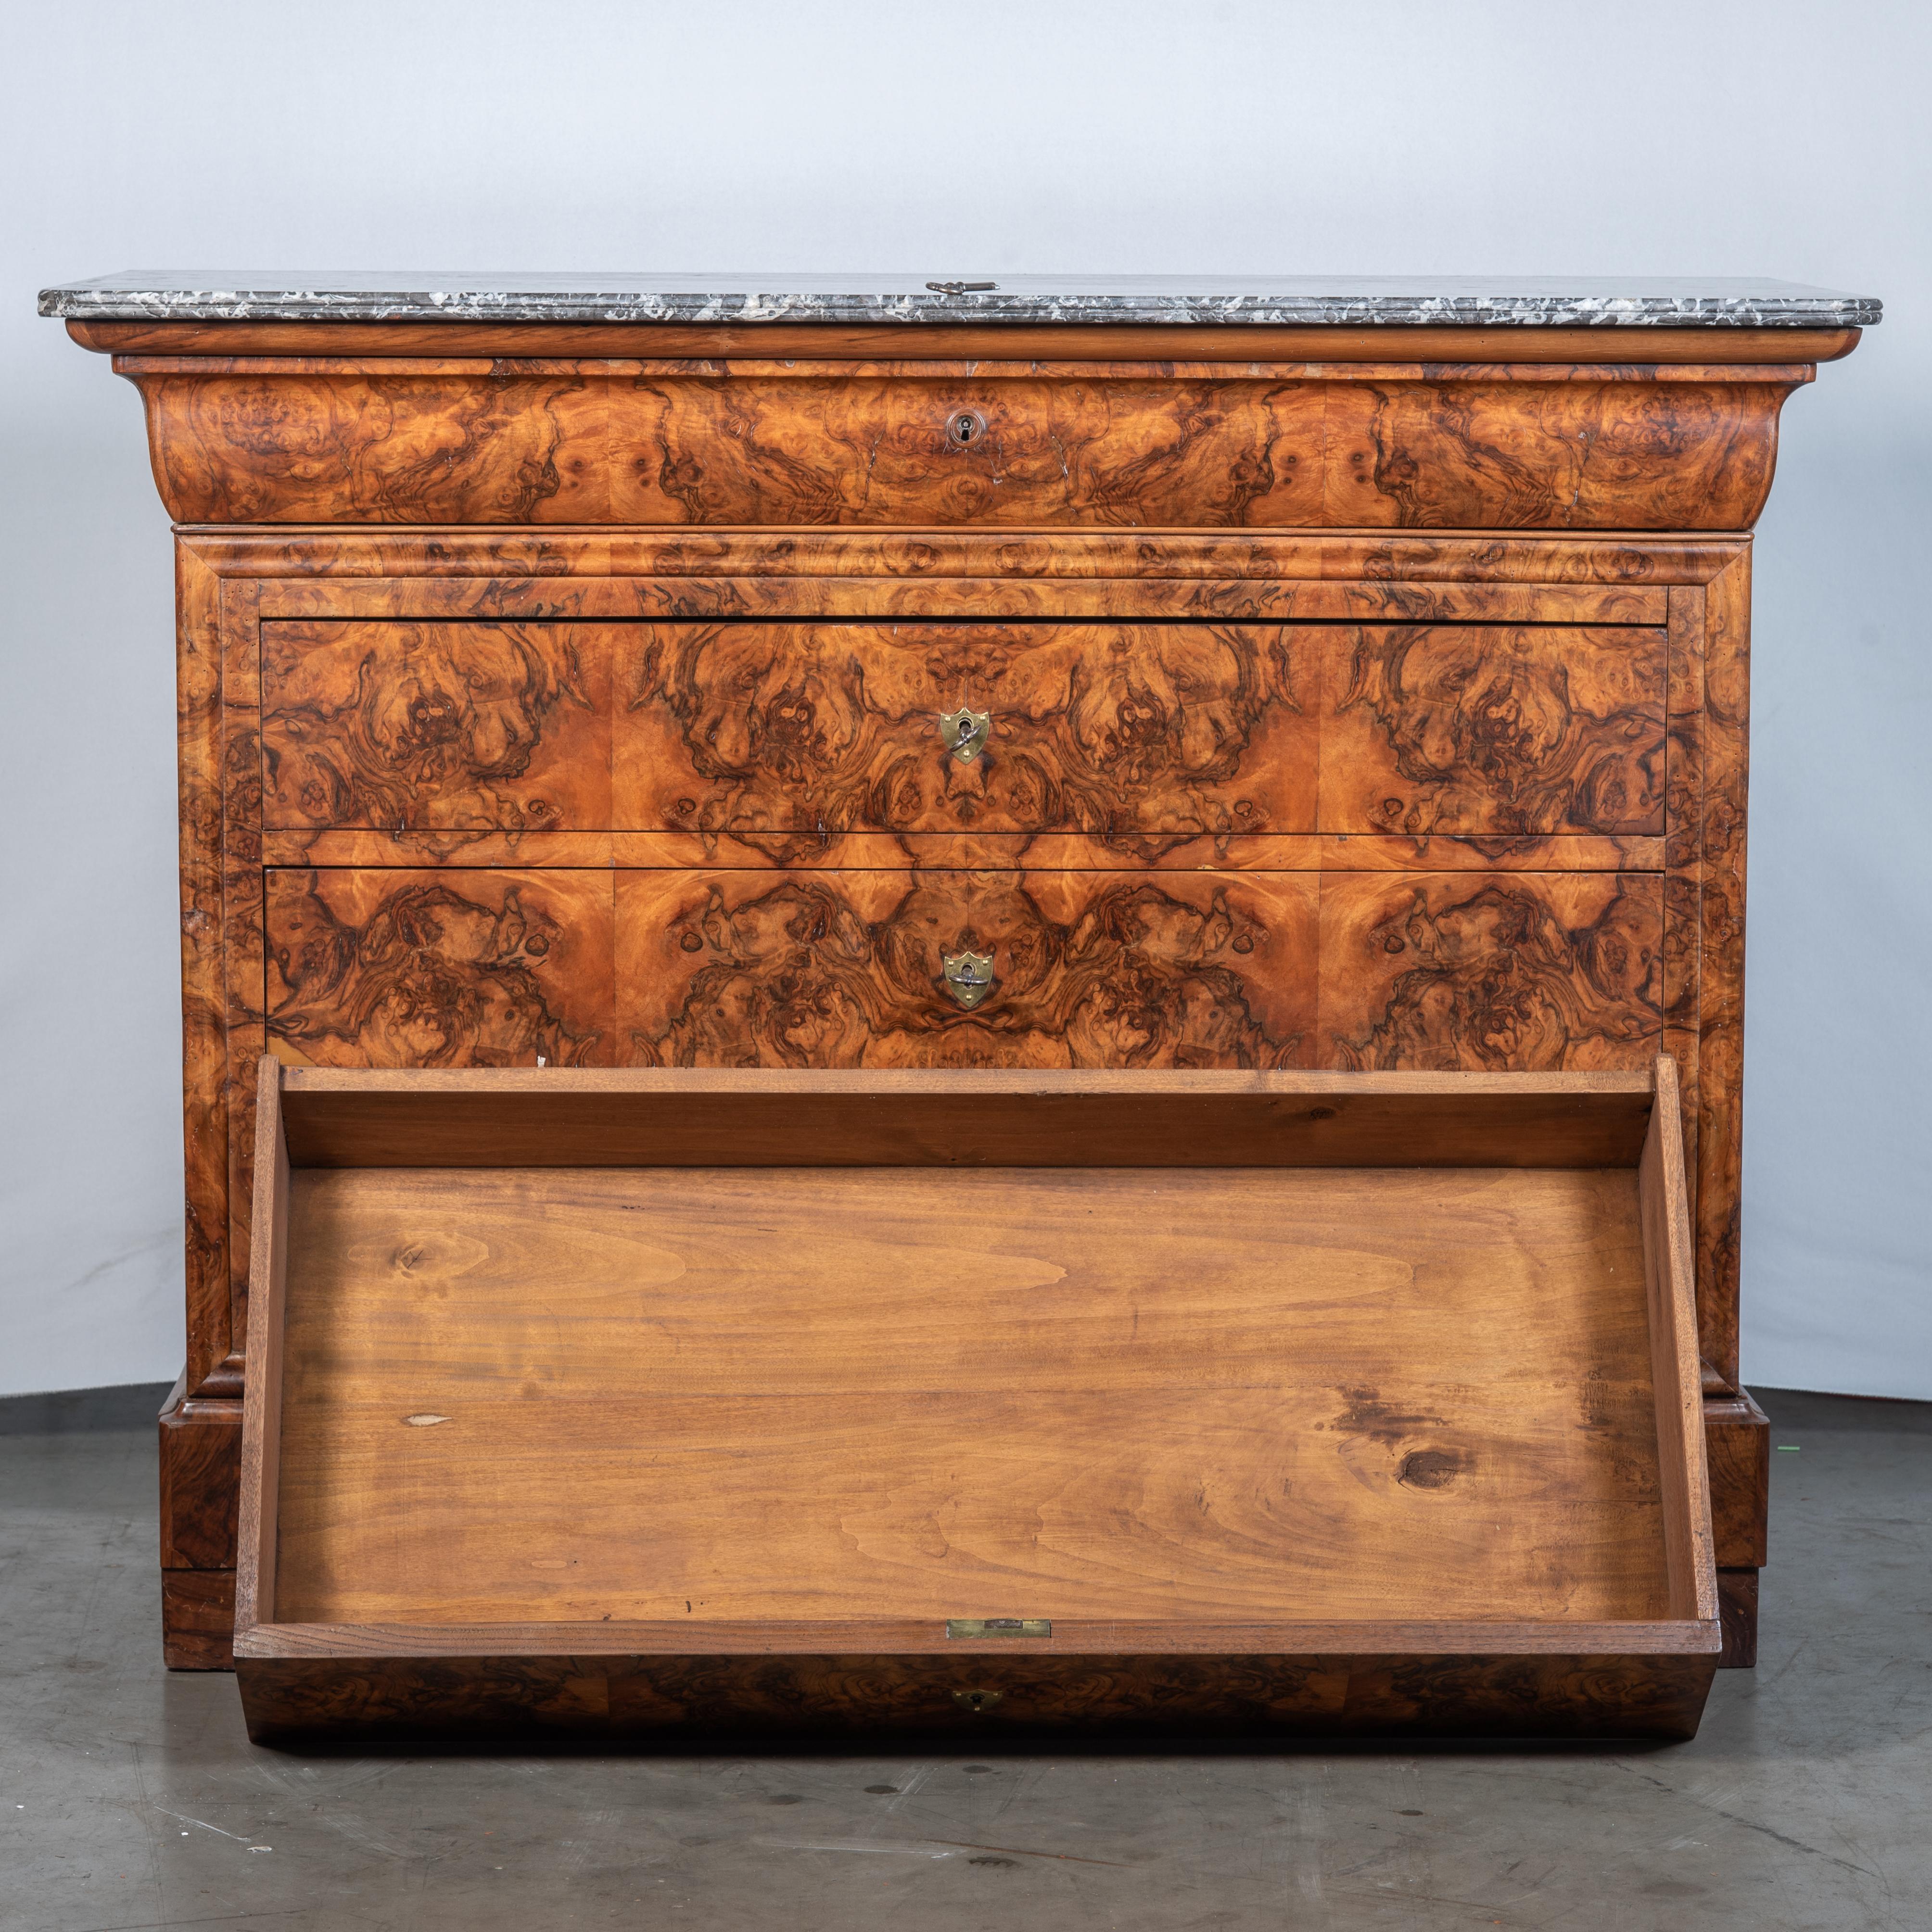 Immerse yourself in the exquisite craftsmanship and timeless elegance of the 19th Century French Louis Philippe Burl Walnut Commode, a stunning piece that pays homage to the distinctive style of King Louis Philippe.

King Louis Philippe, who reigned